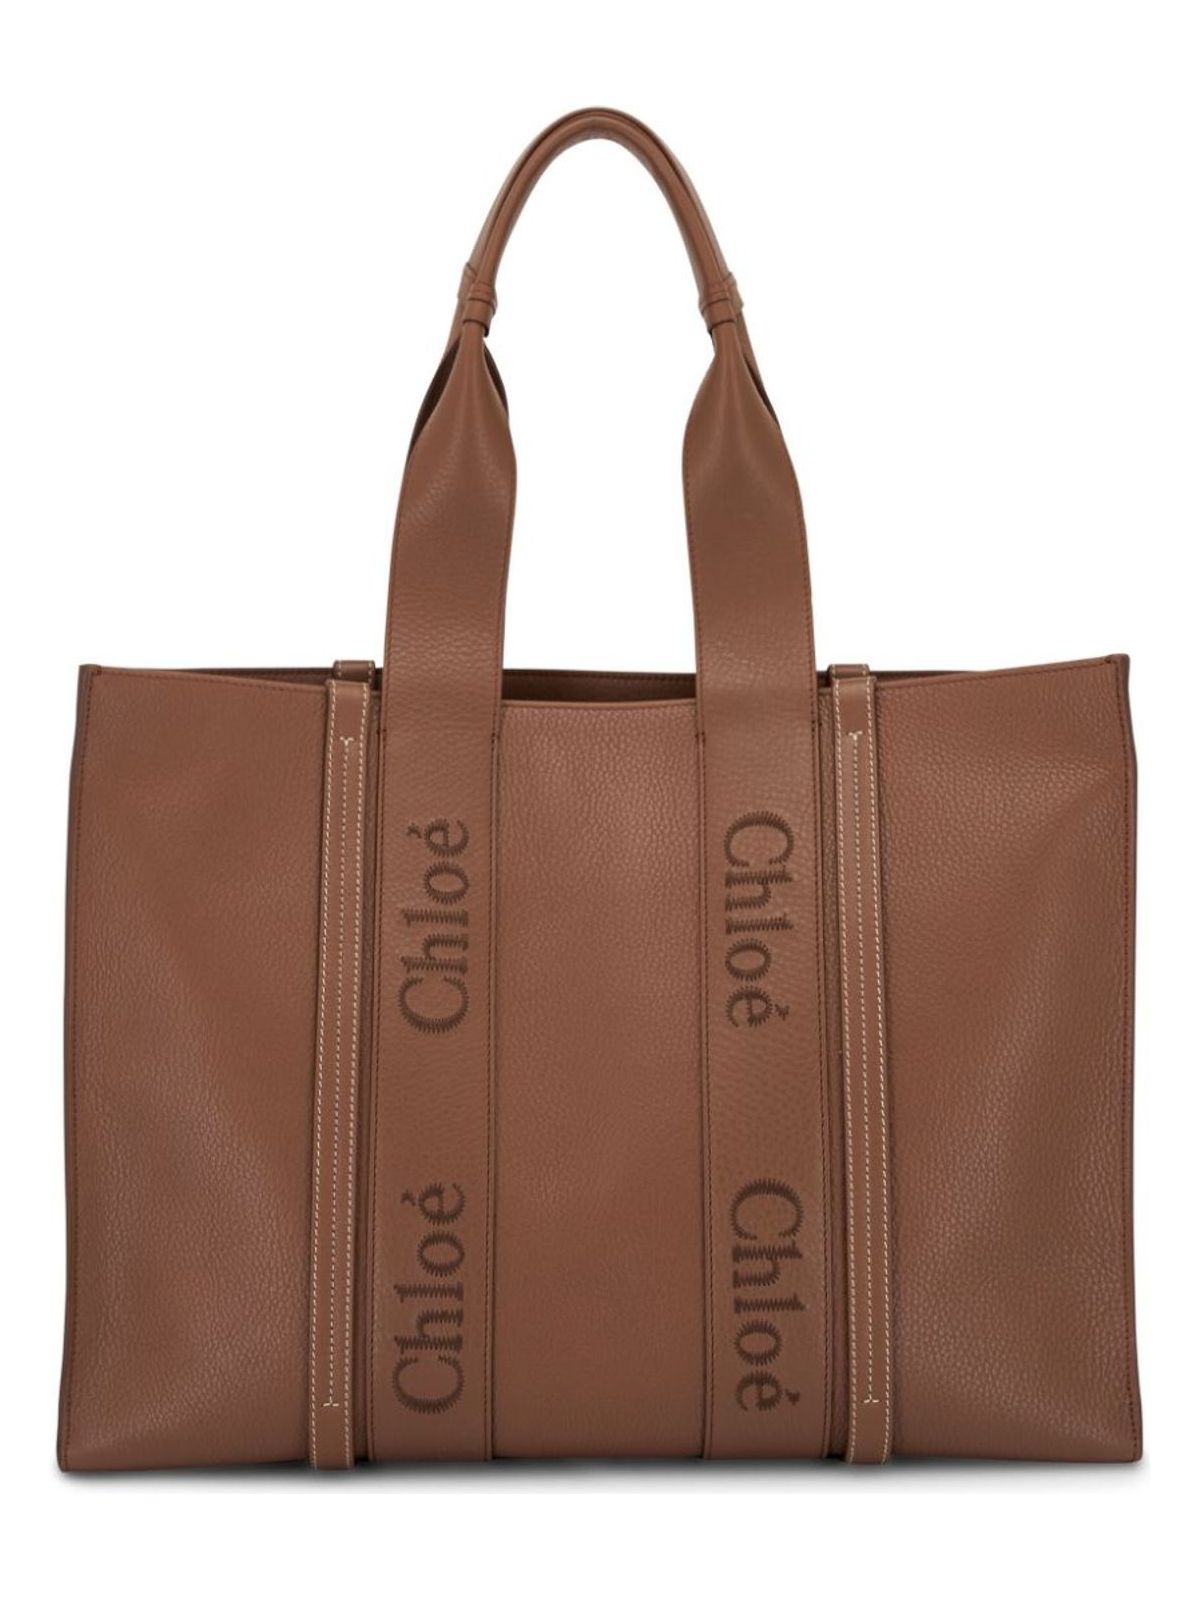 WOODY29X CHLOÉ WOODY LARGE LEATHER TOTE